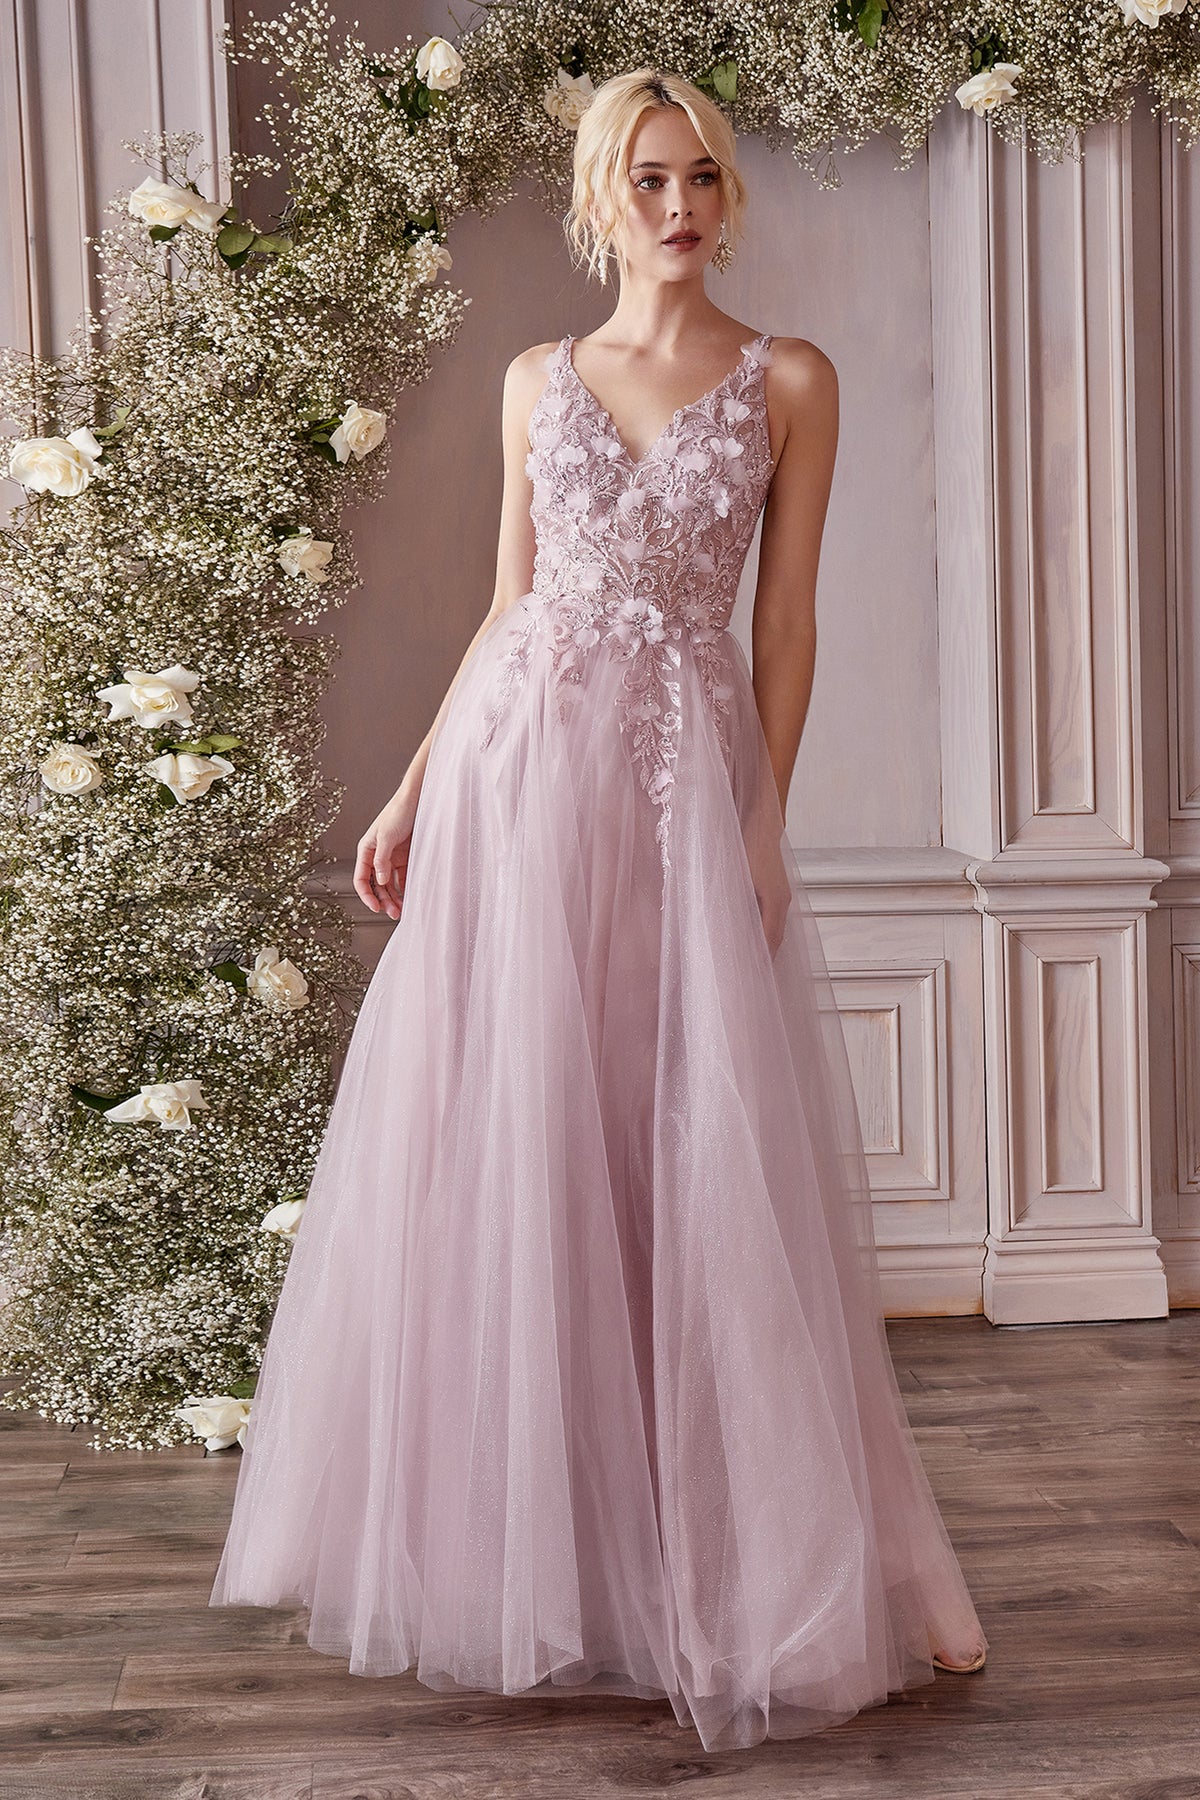 Cute Long Gown with Floral Accents and Layered Skirt #CDCD0181 - NORMA REED